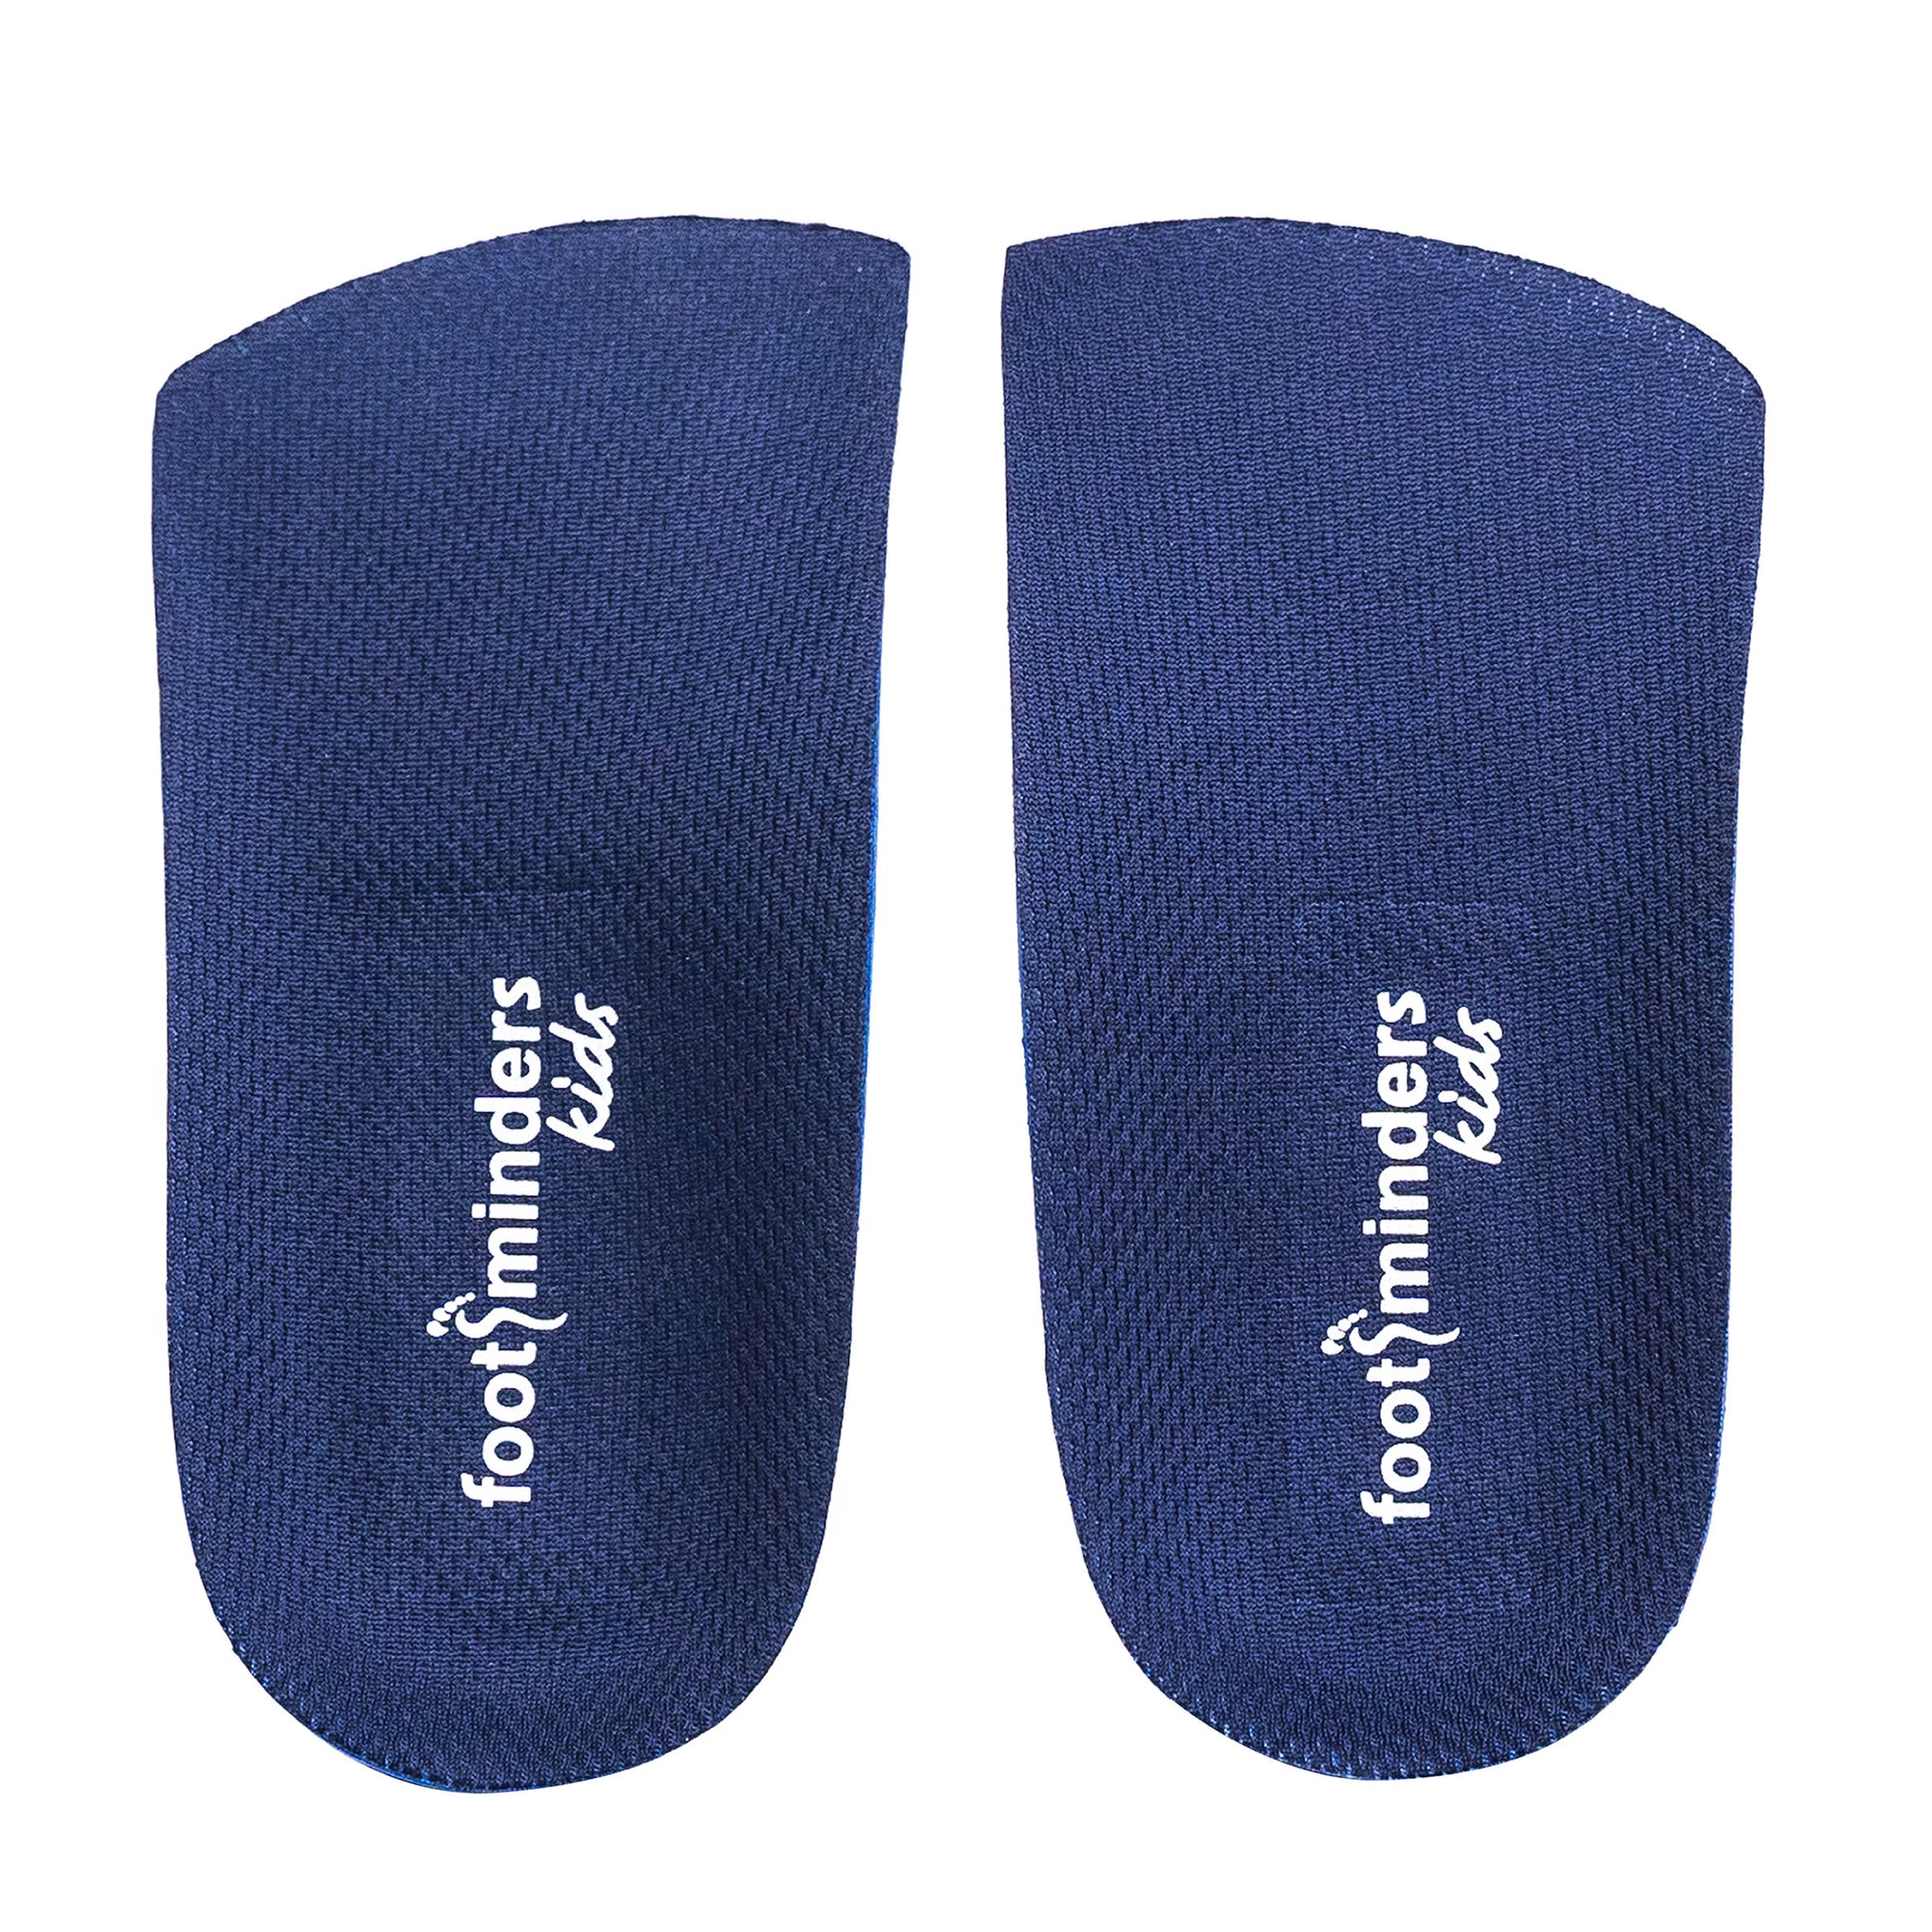 Footminders KIDS - Orthotic arch support insoles for children (Pair) - Footminders Inc.